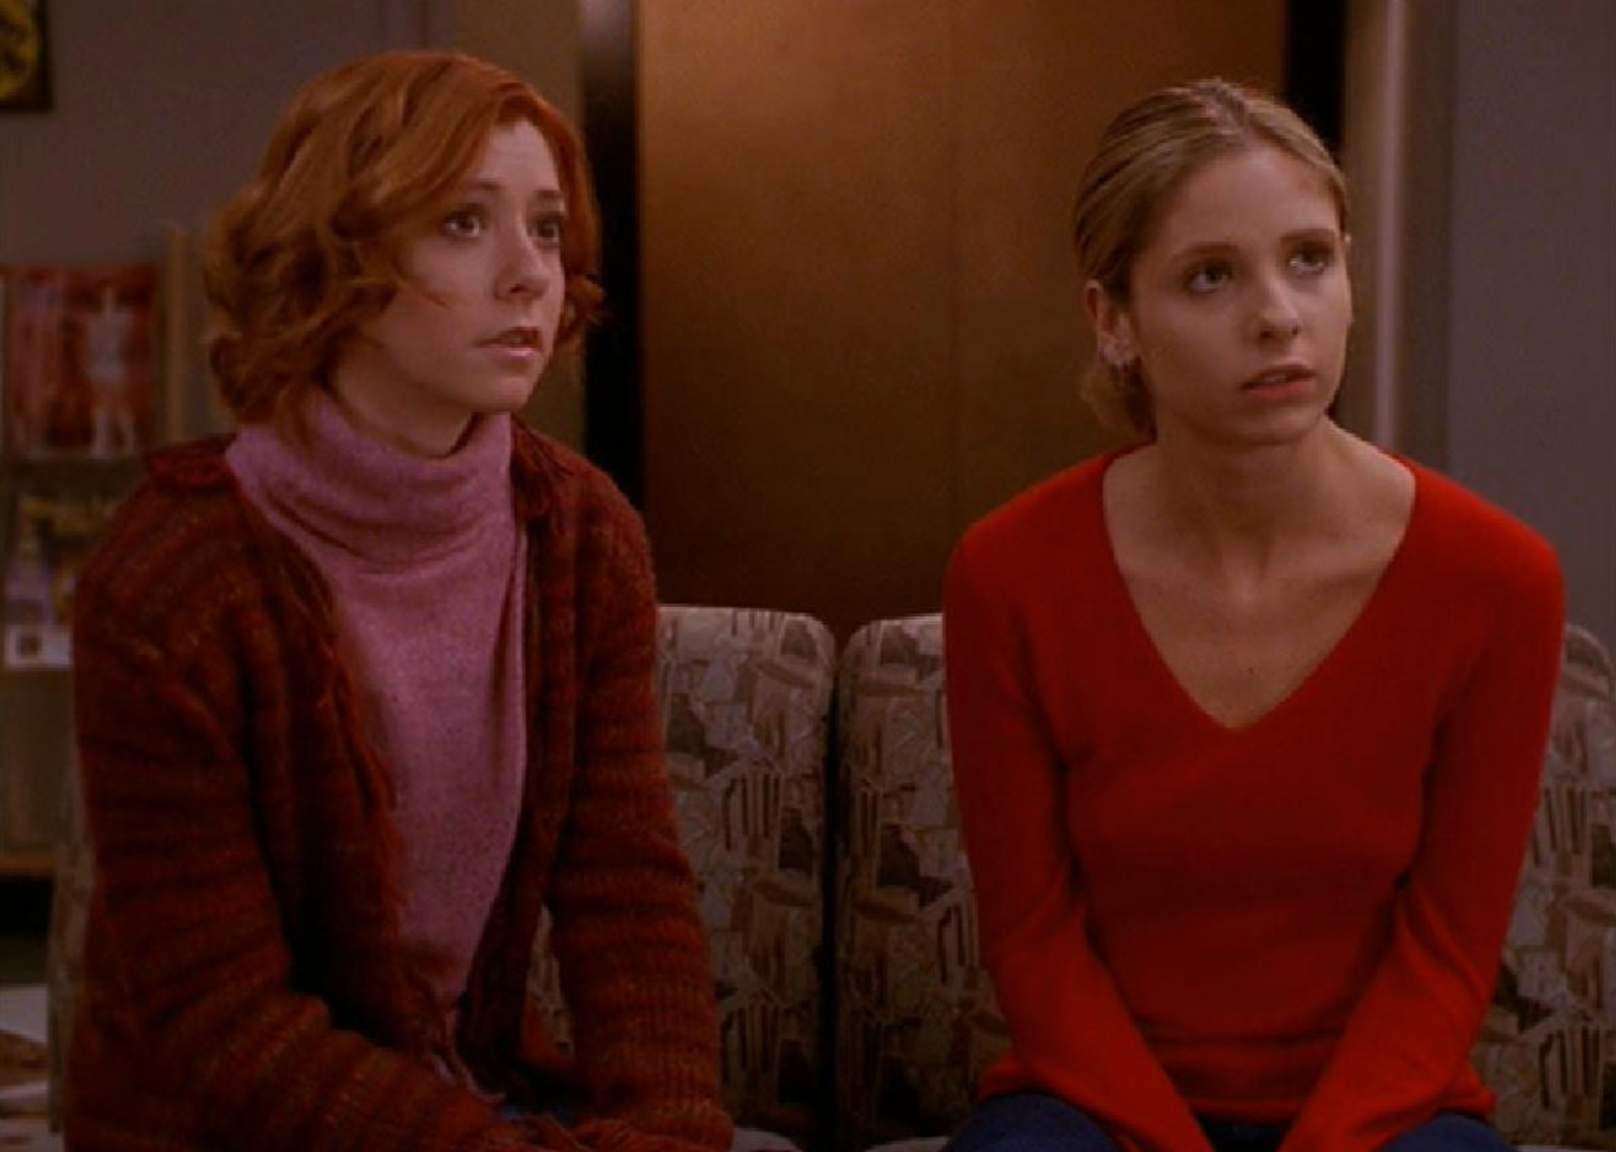 Sarah Michelle Gellar and Alyson Hannigan, wearing pink and red, sit on the couch together.